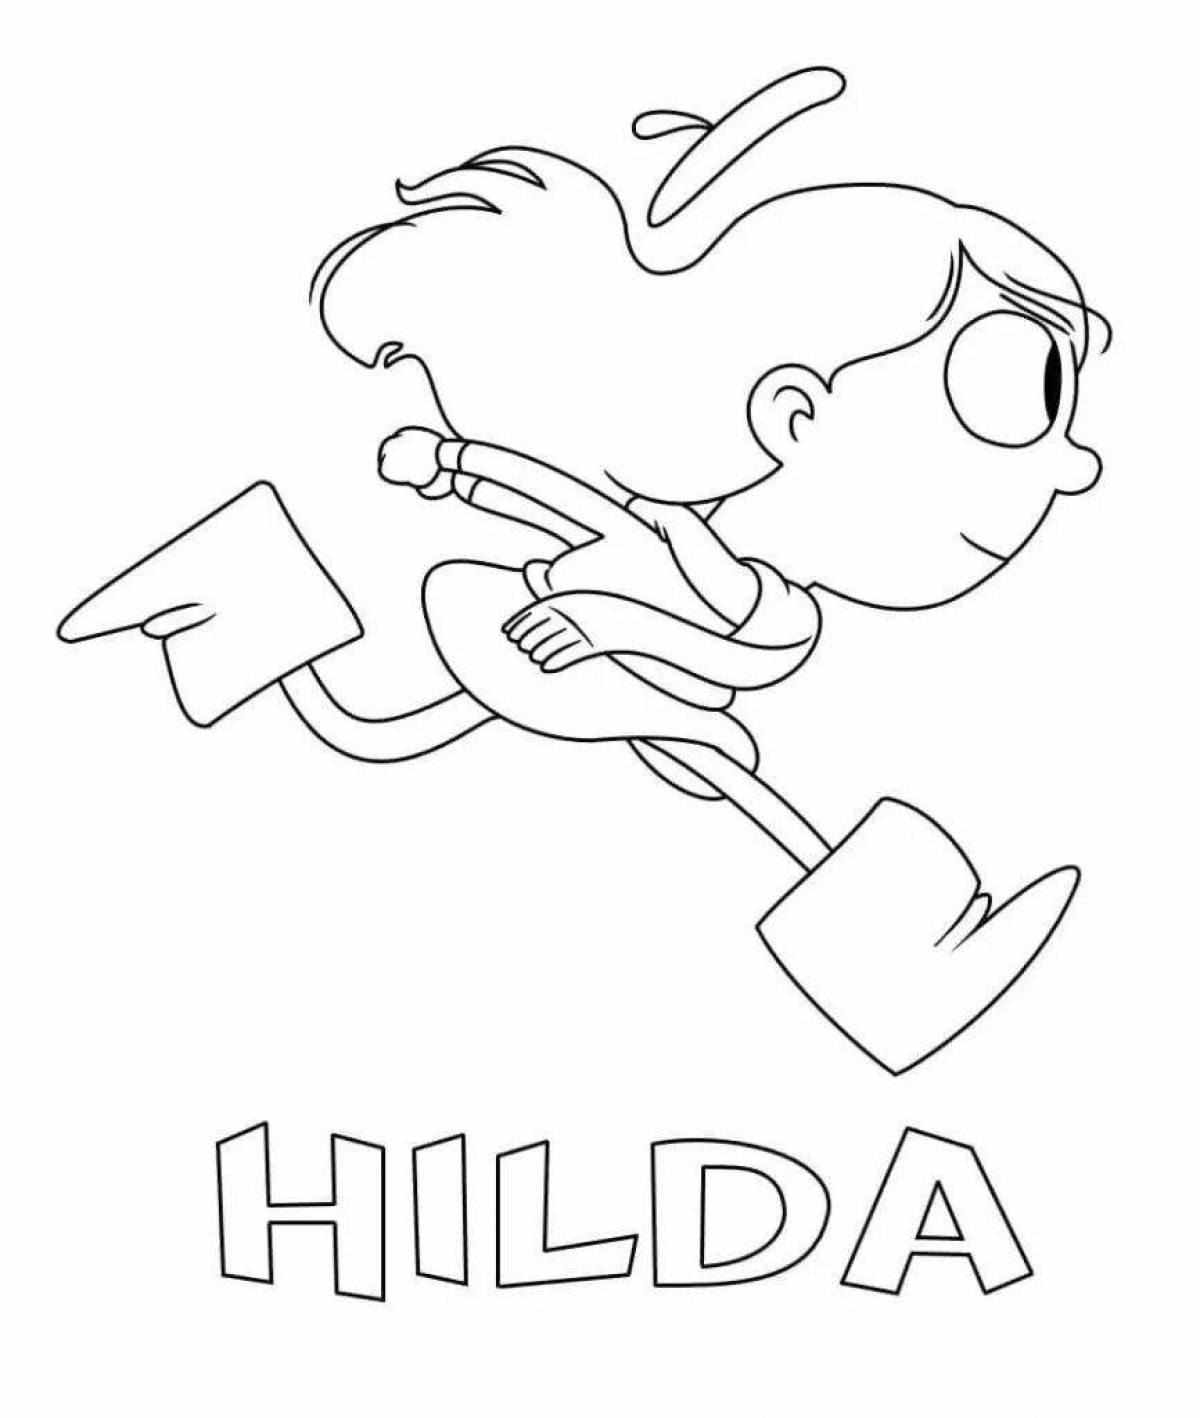 Hilda's outstanding coloring page